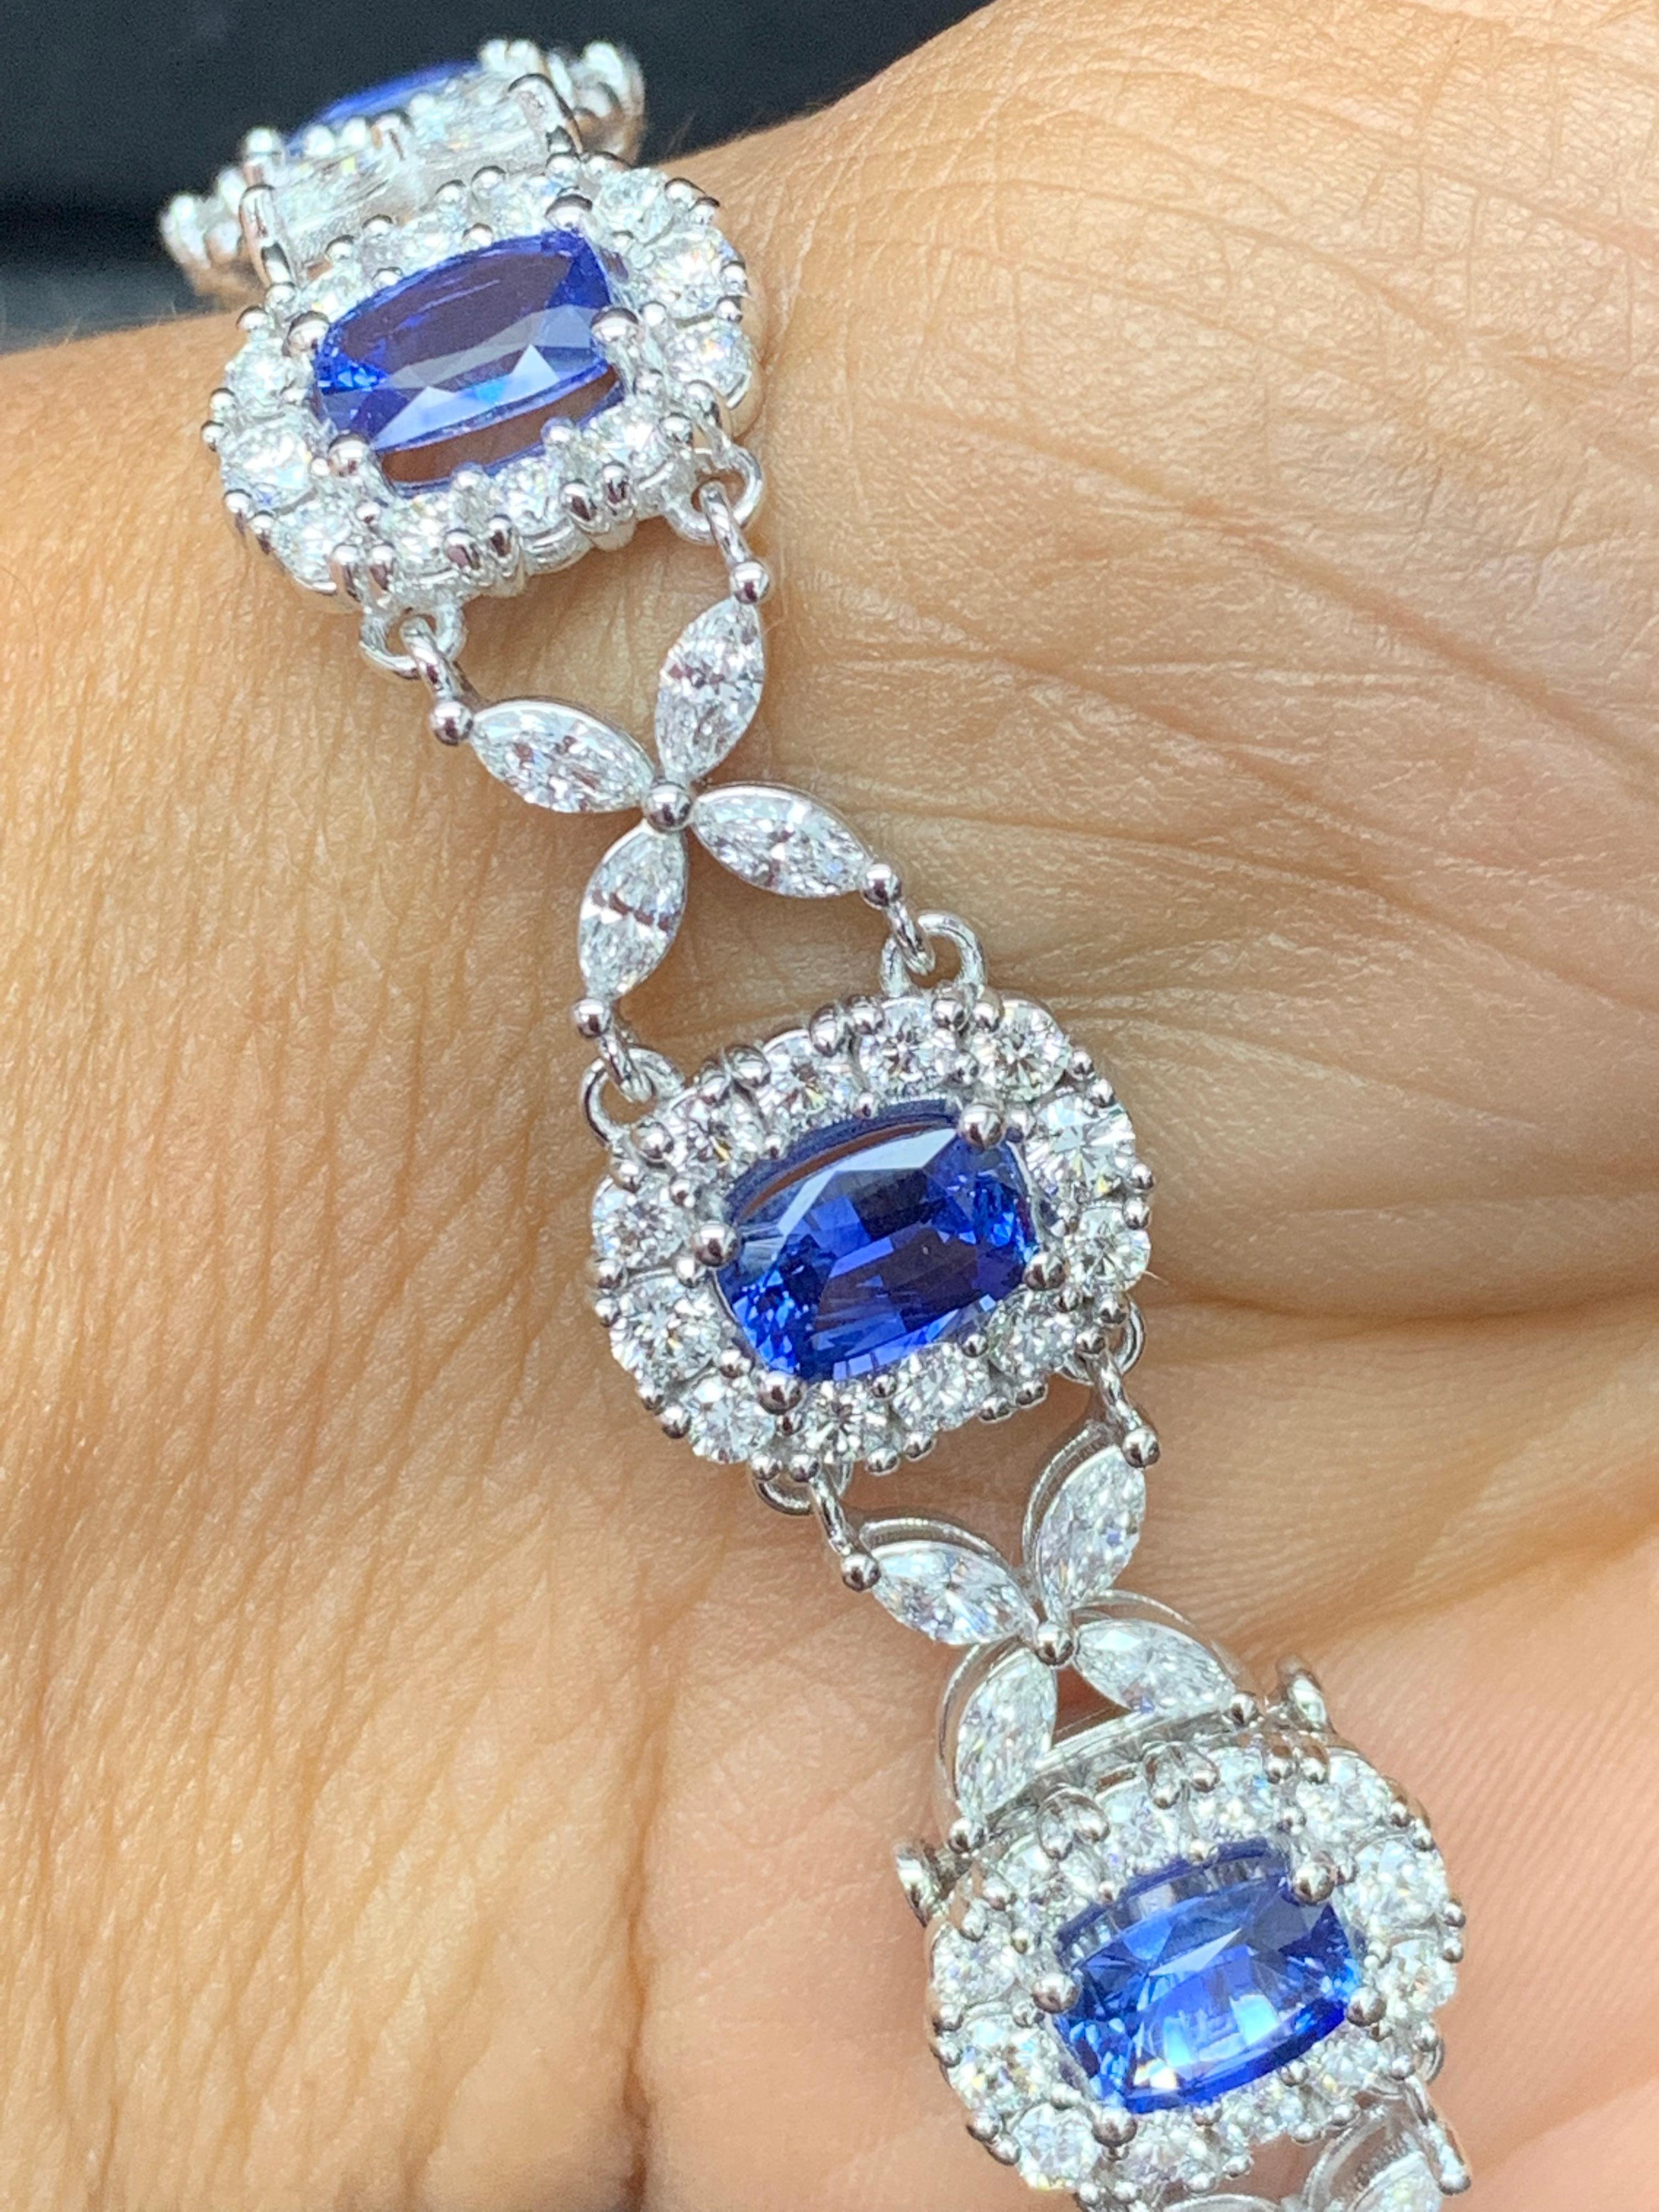 11.47 Carat Oval Cut Blue Sapphire and Diamond Tennis Bracelet in 14K White Gold For Sale 8